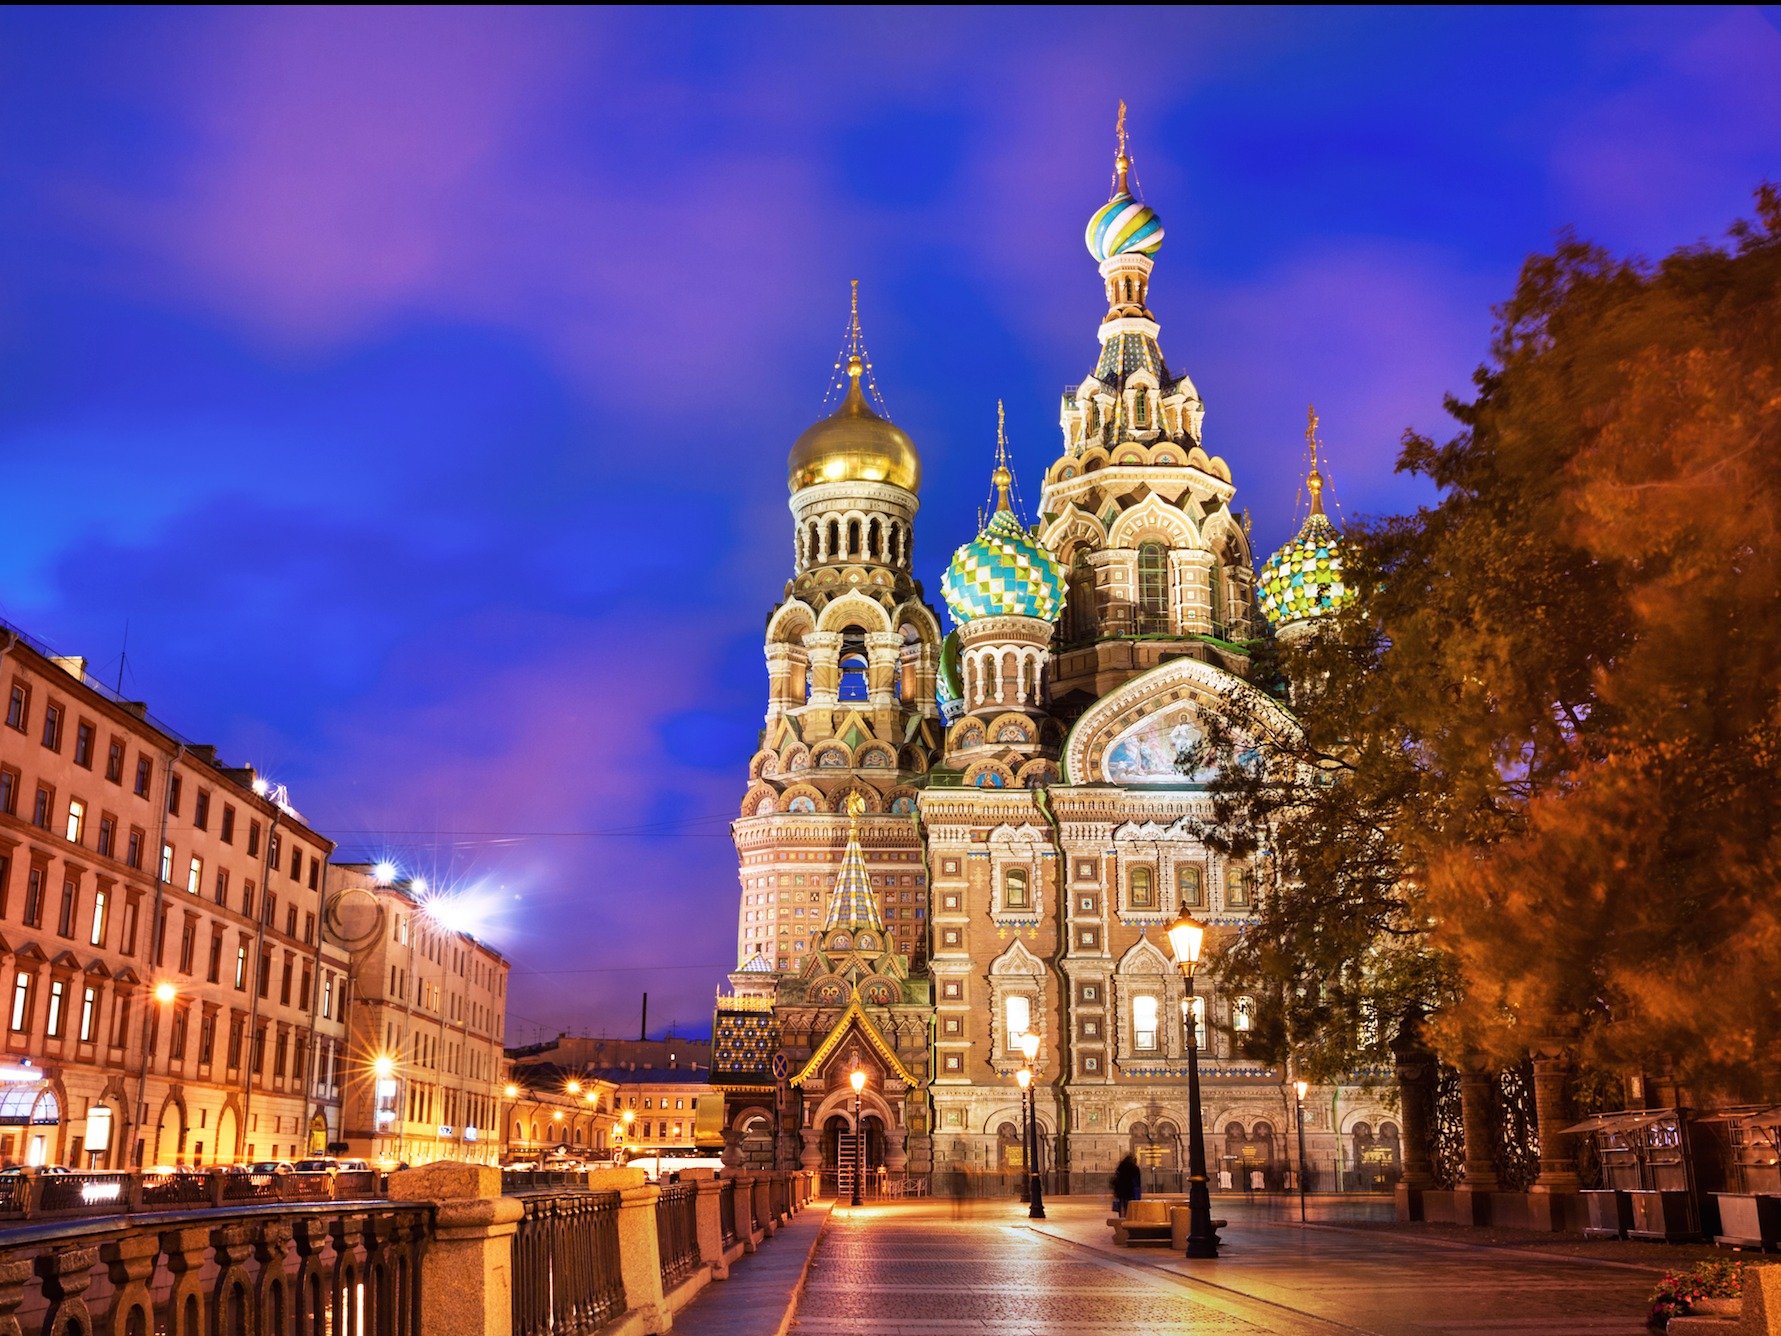 Pictures show why St. Petersburg is Europe's best destination ...